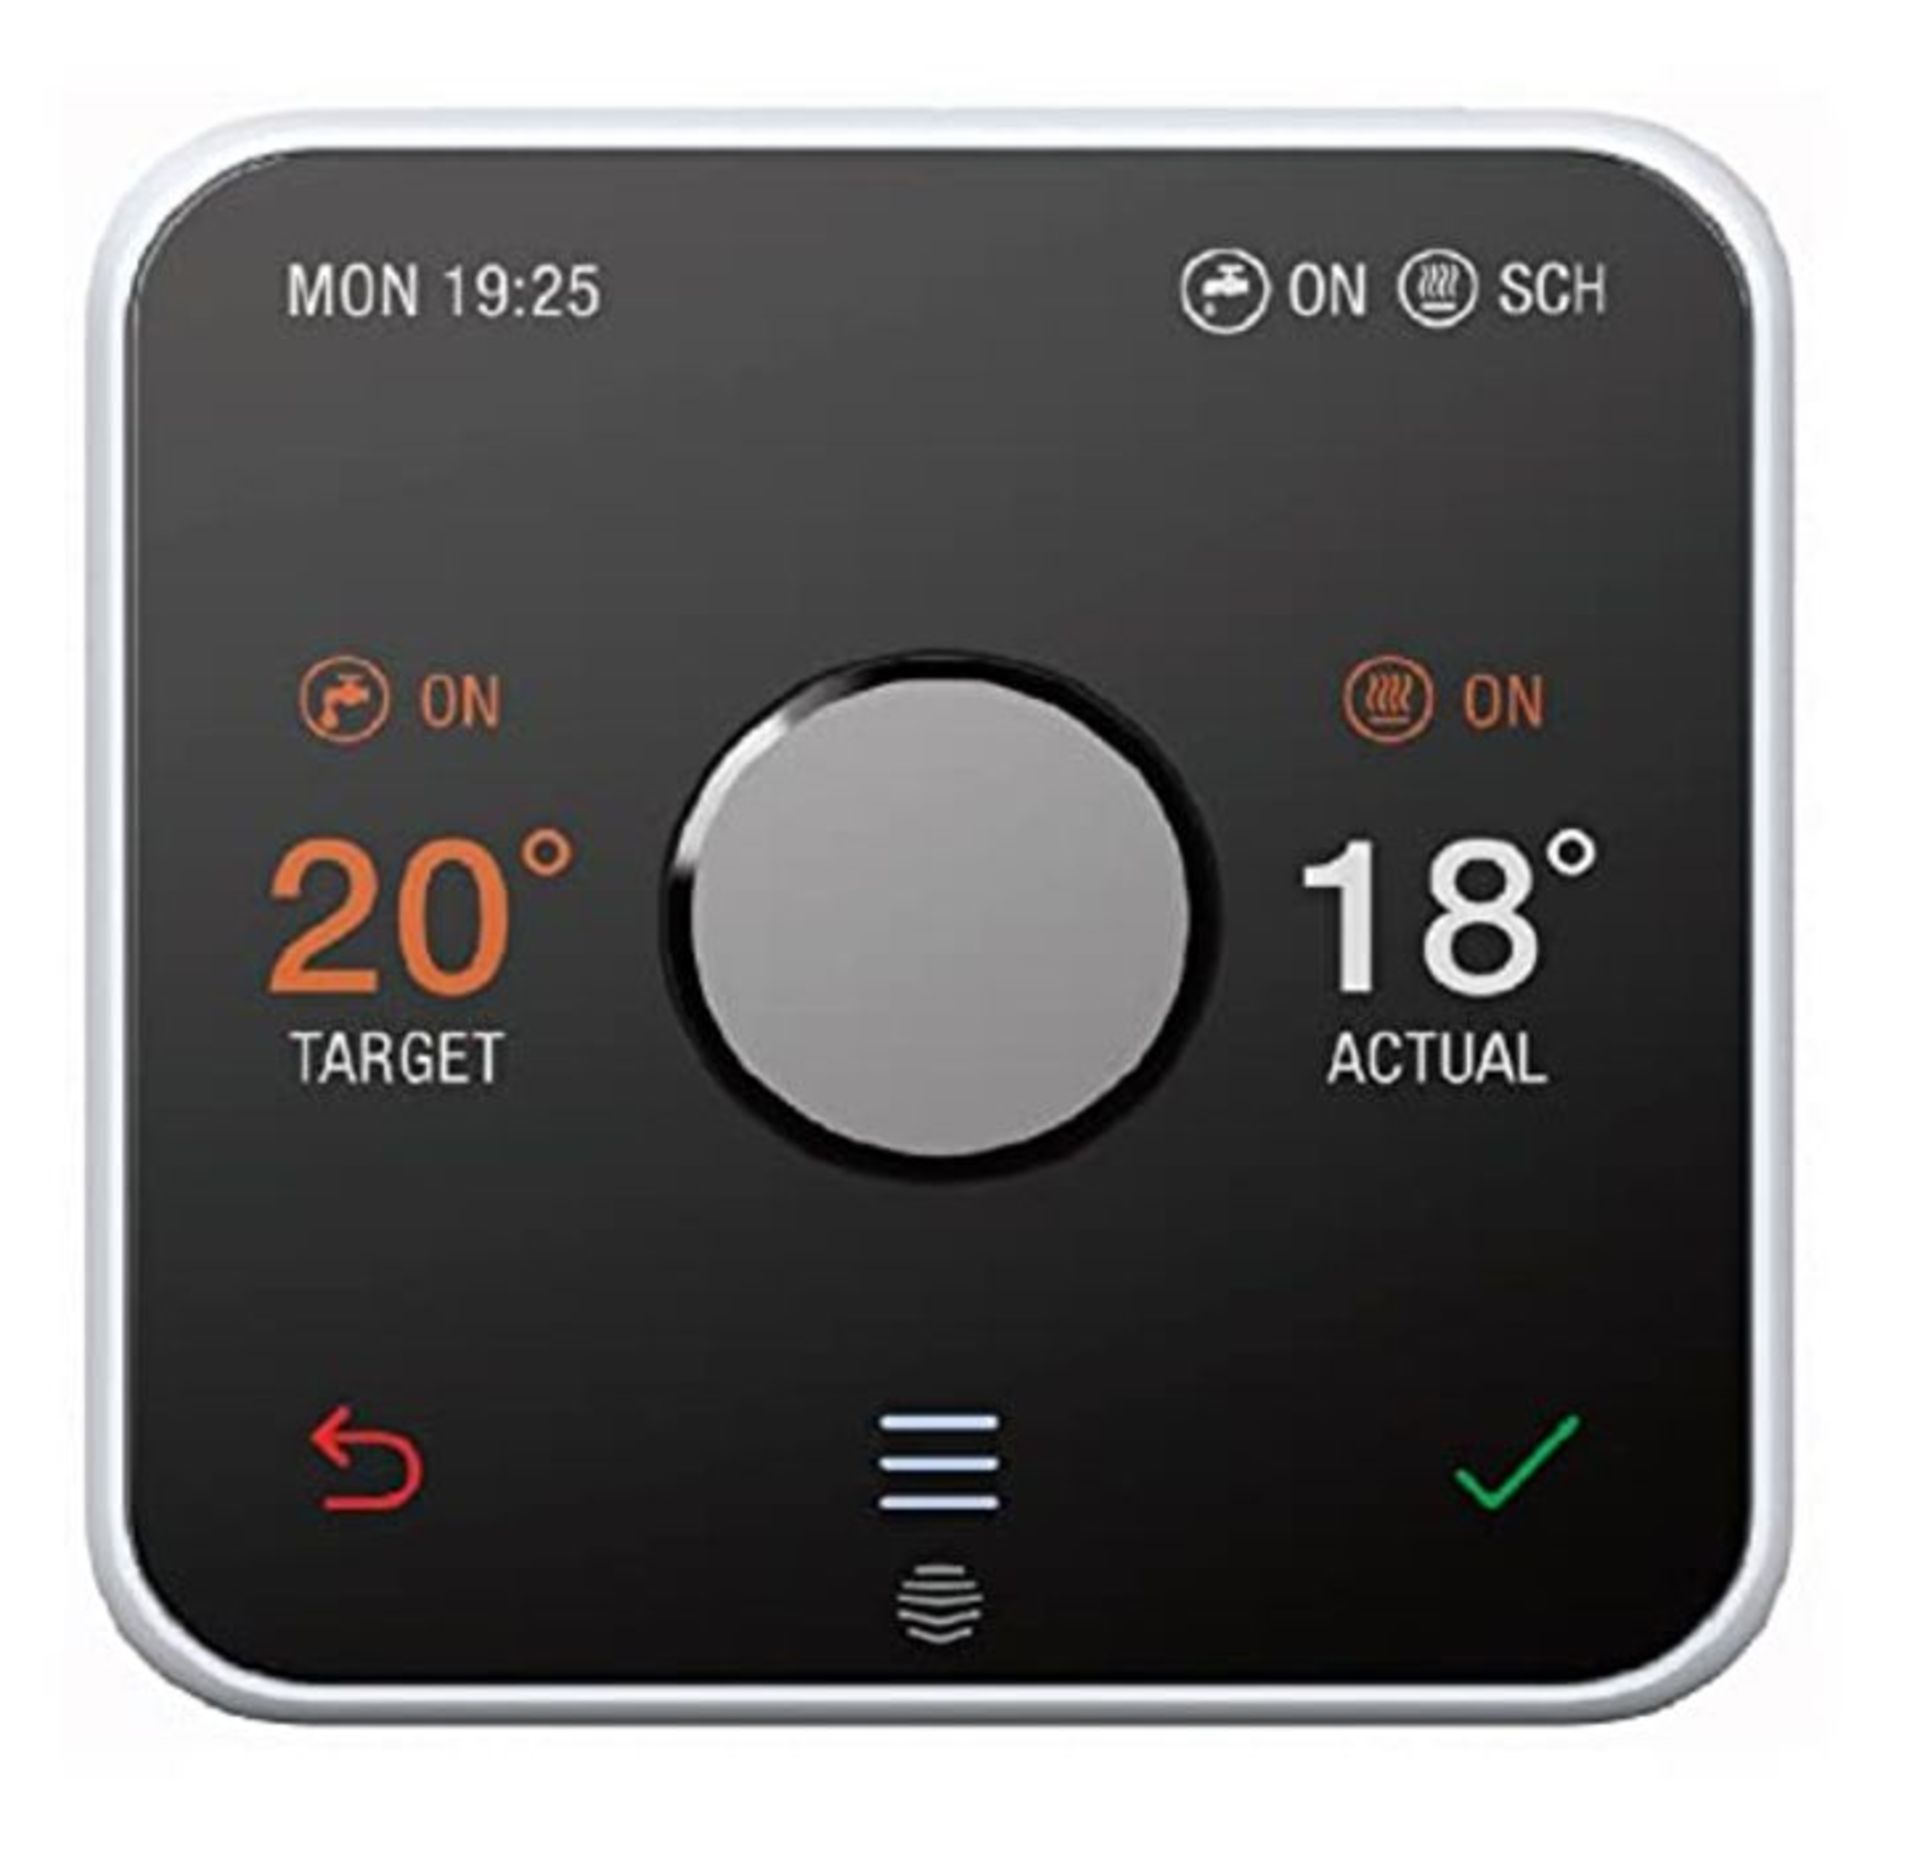 RRP £149.00 Hive Thermostat for Heating & Hot Water with Hive Hub - Energy Saving Thermostat